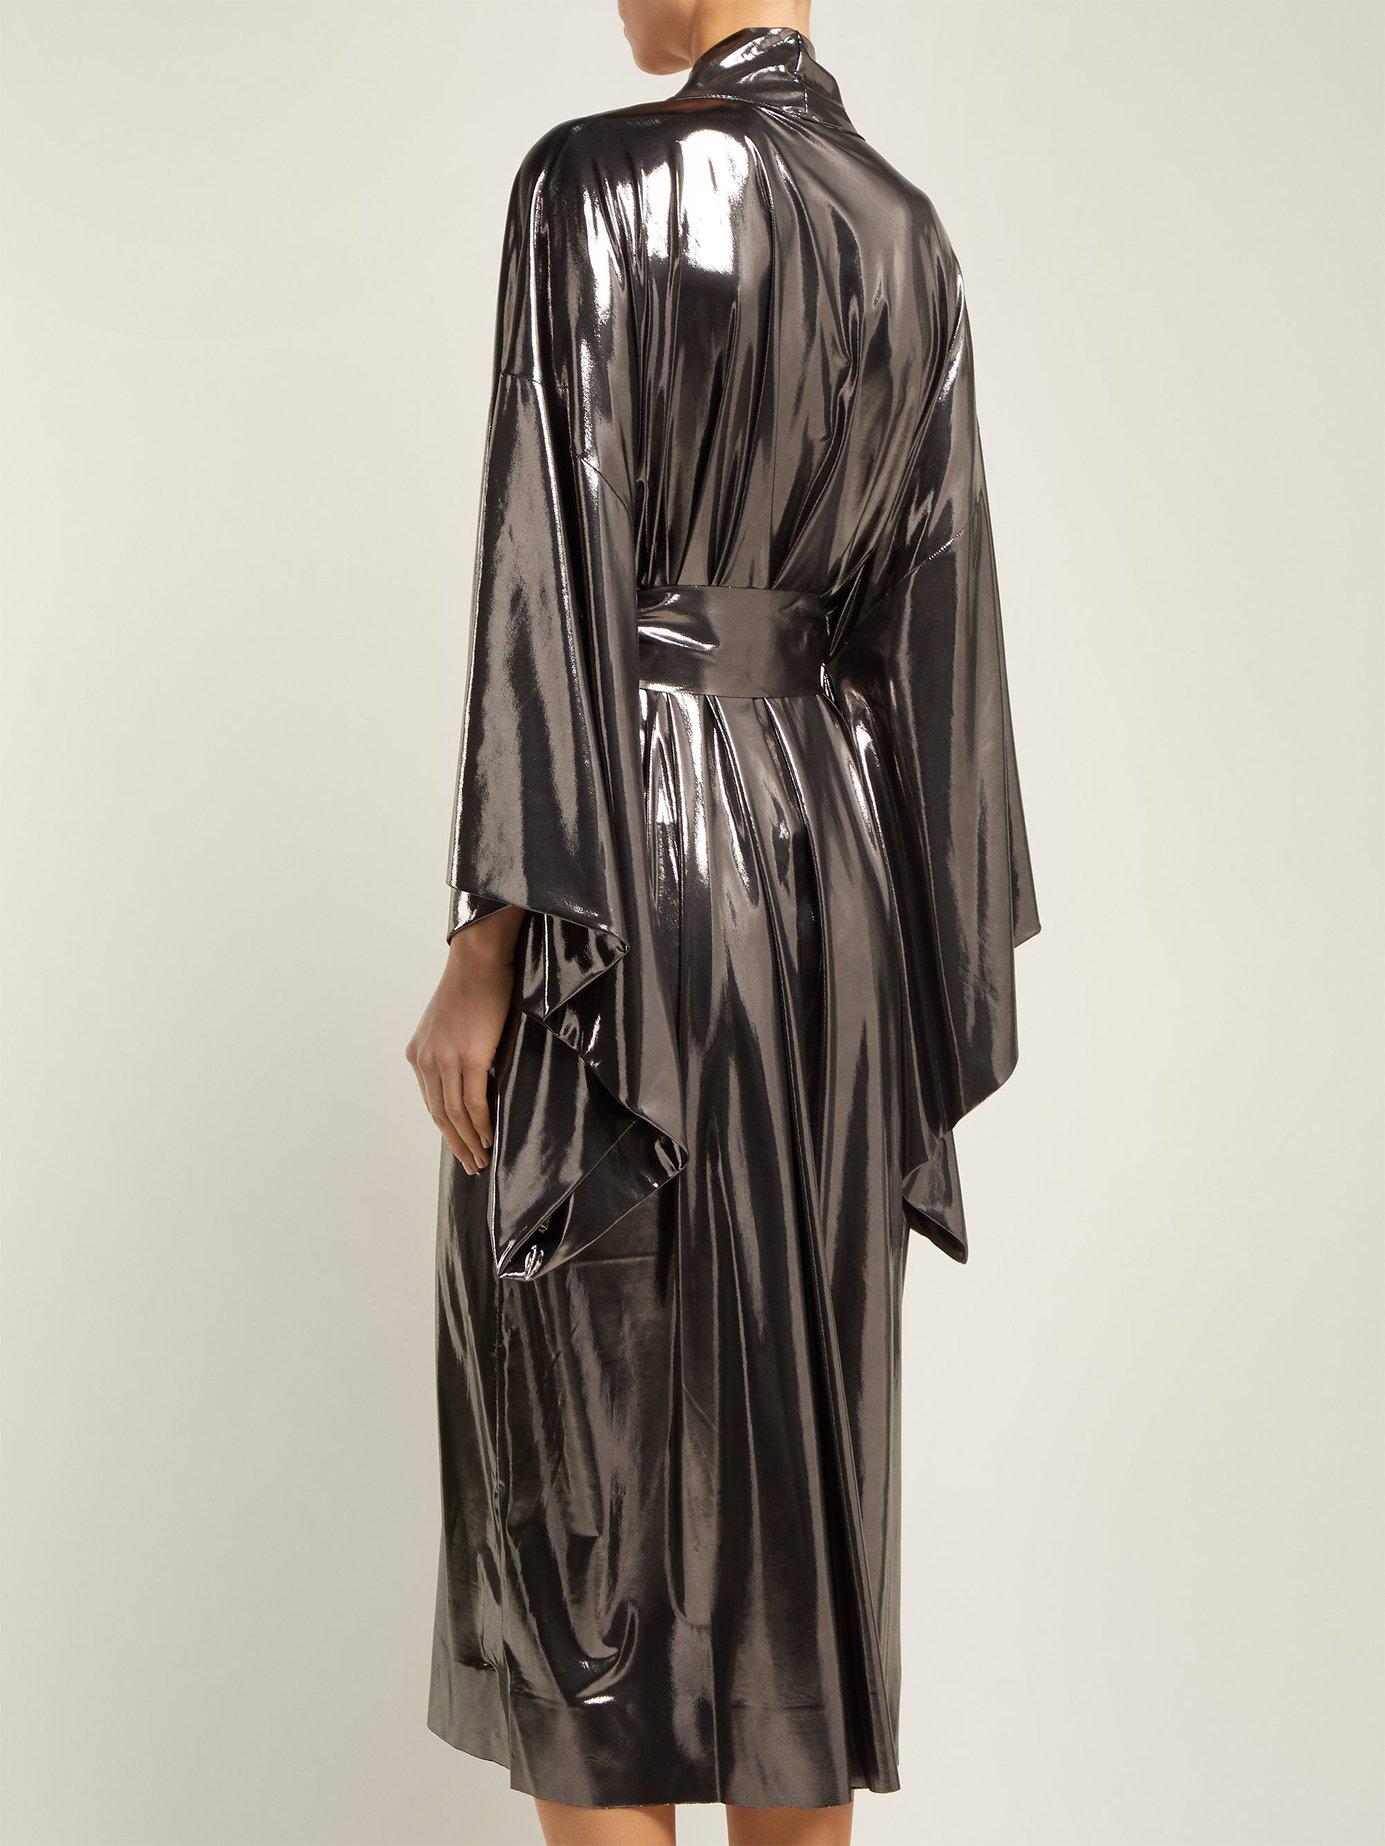 Norma Kamali Belted Lamé Robe in Metallic | Lyst